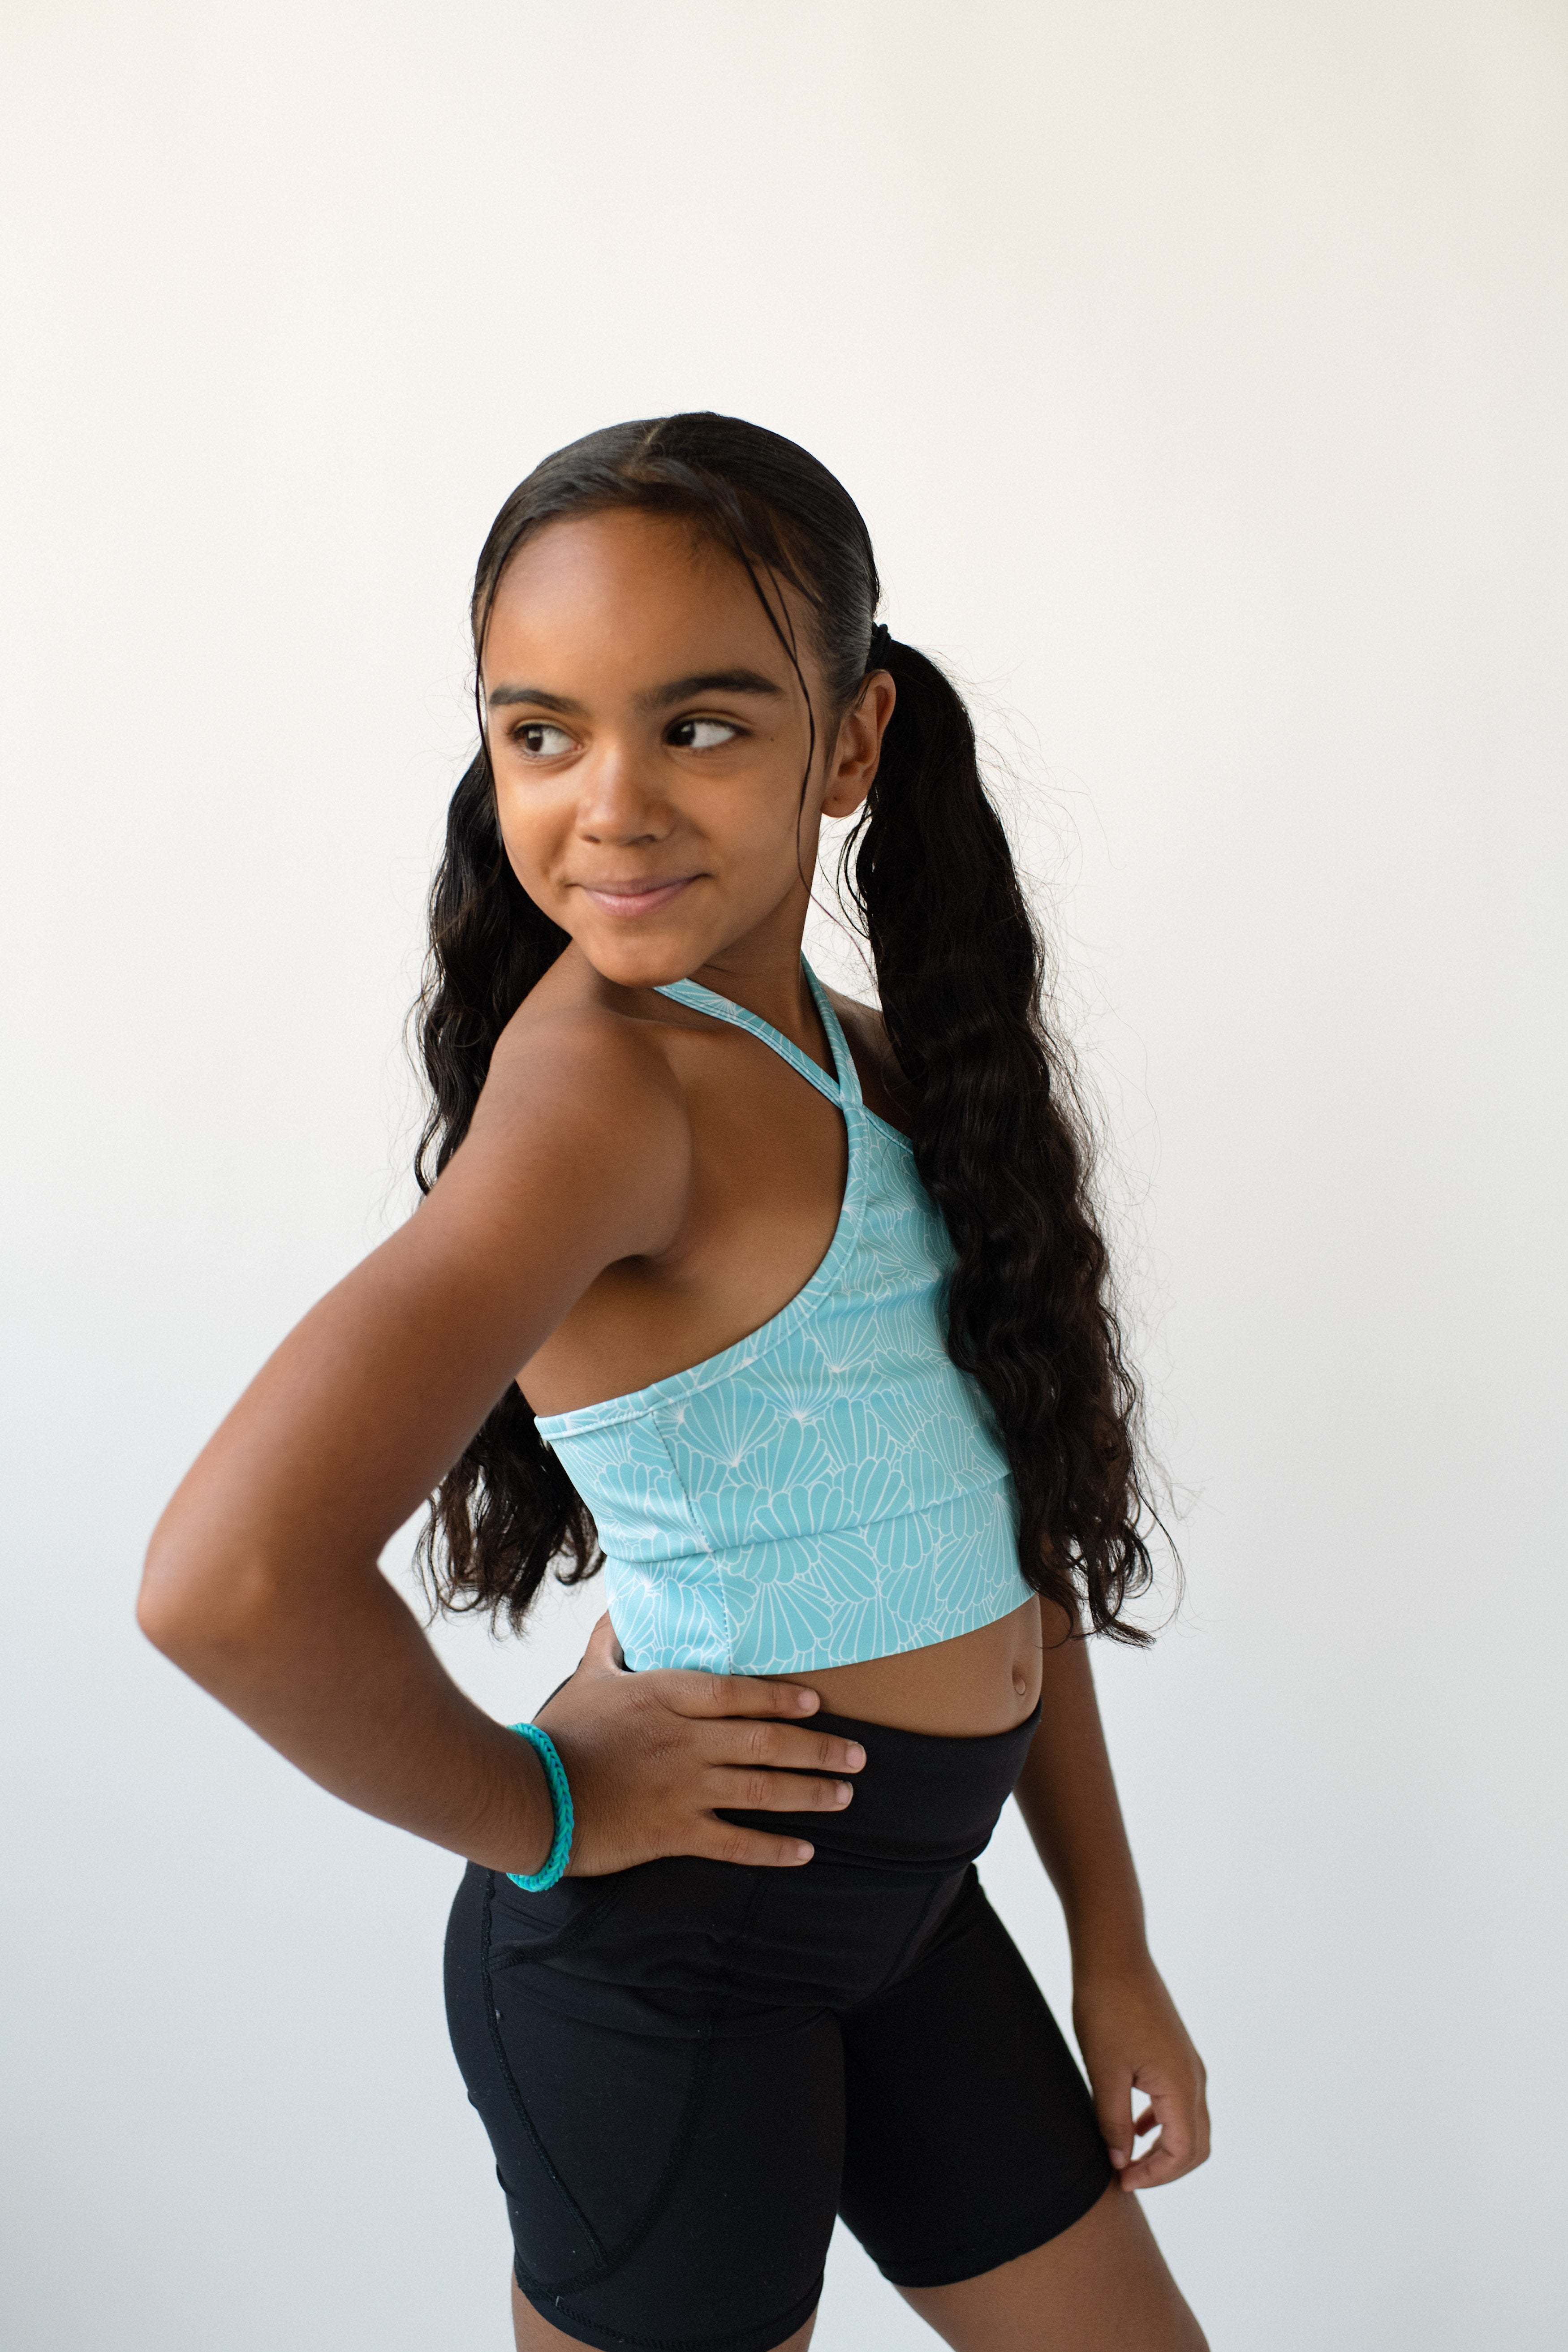 Sunshine In The Studio: Junior's Halter Top (ages 8-14 years old)